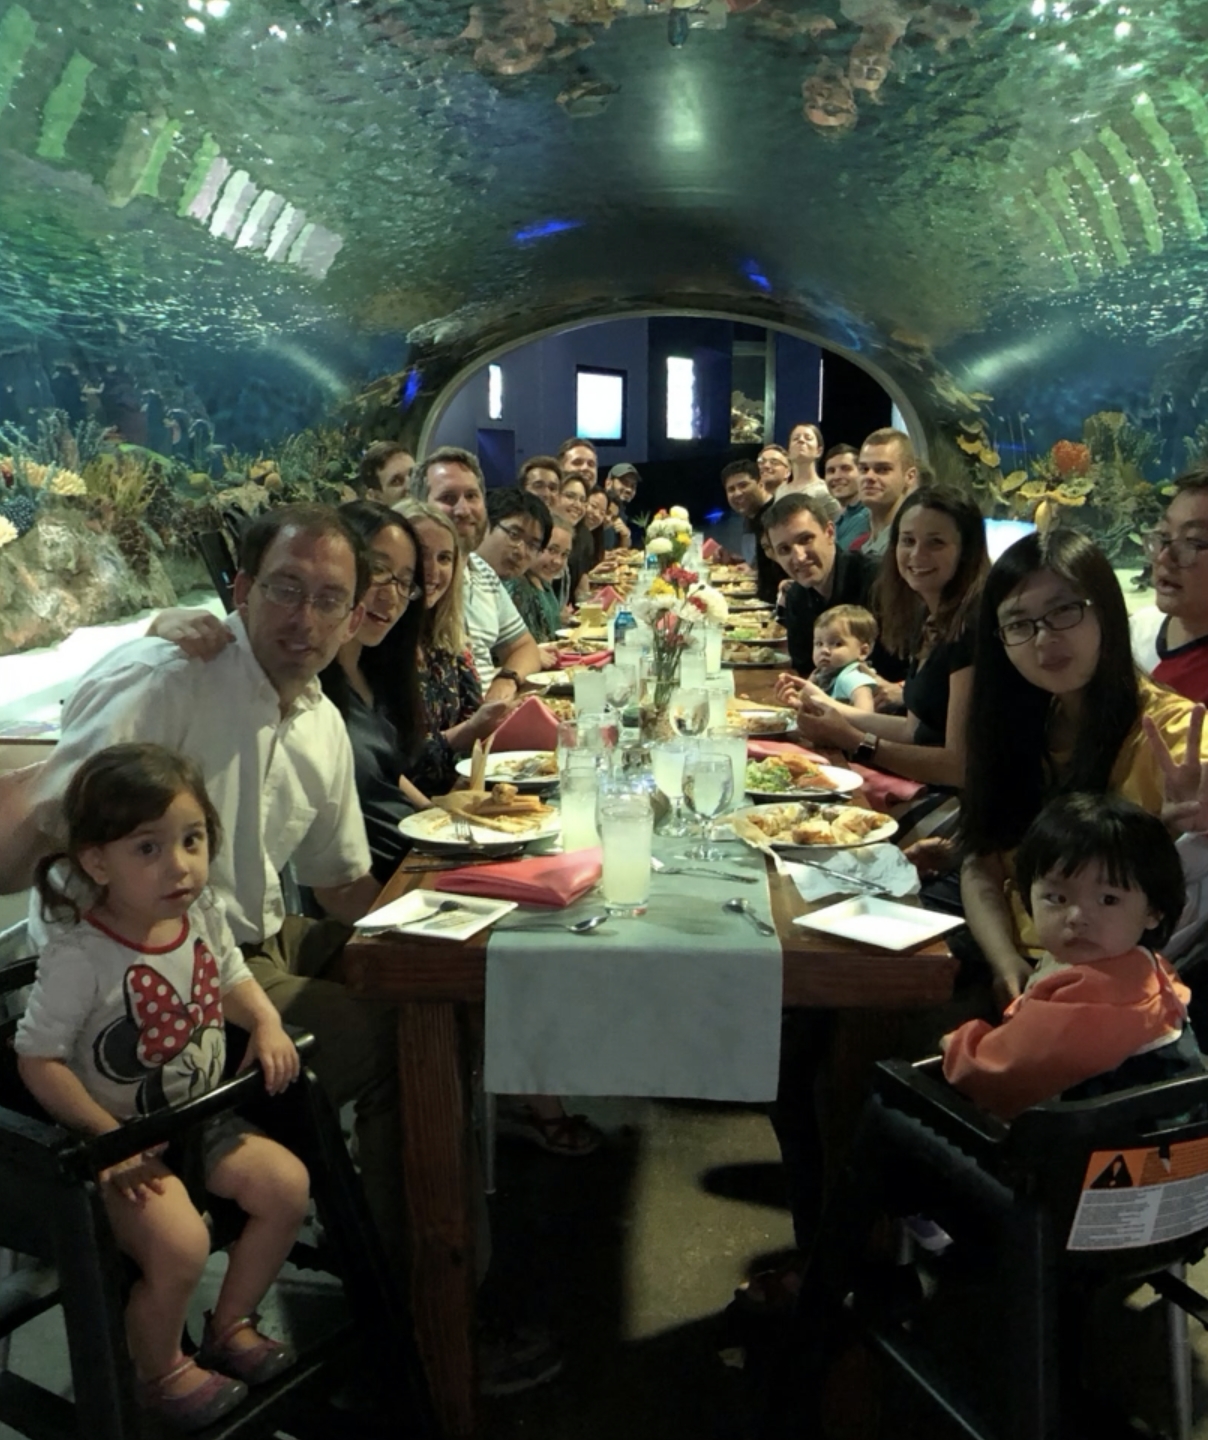 Equity Methods families gather for a private dinner at the OdySea Aquarium. (Pre-pandemic photo.)